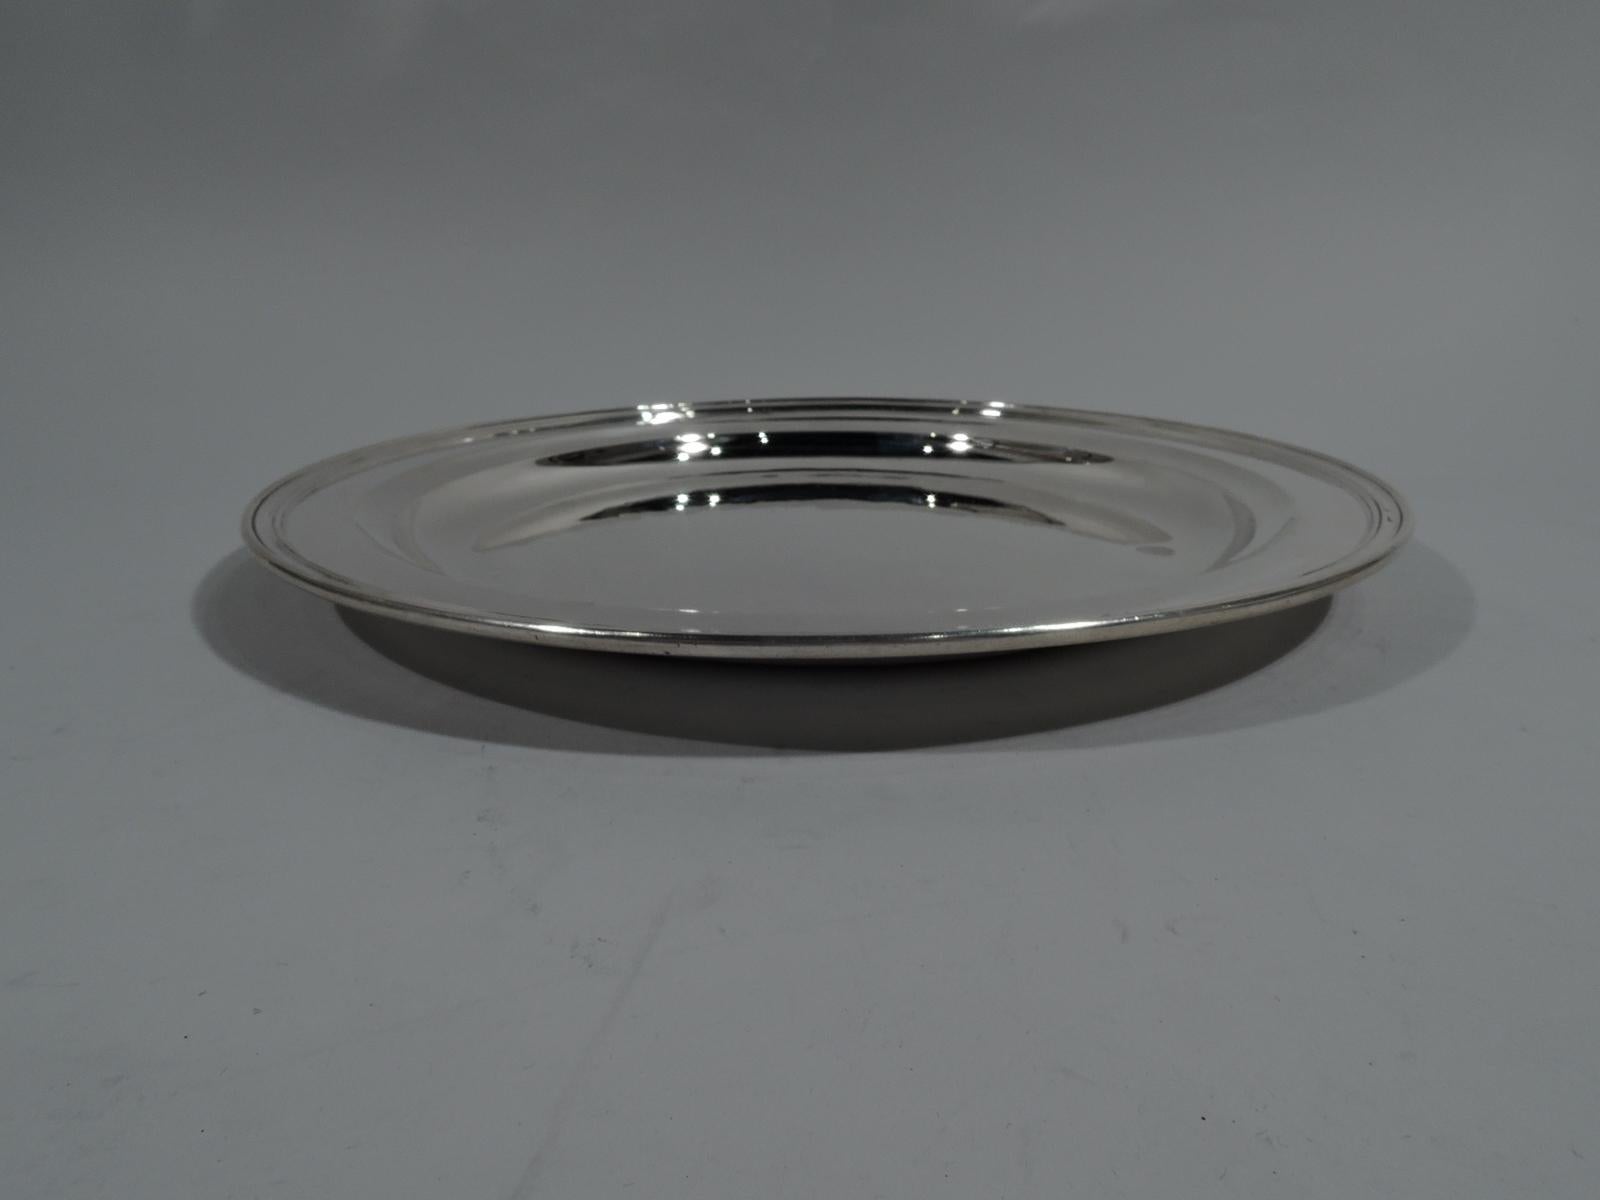 Deep and heavy sterling silver serving tray. Made by Tiffany & Co. in New York, circa 1910. Round well, tapering shoulder, and molded rim. Fully marked including pattern no. 11742C and director’s letter m (1907-47). Weight: 30.5 troy ounces.